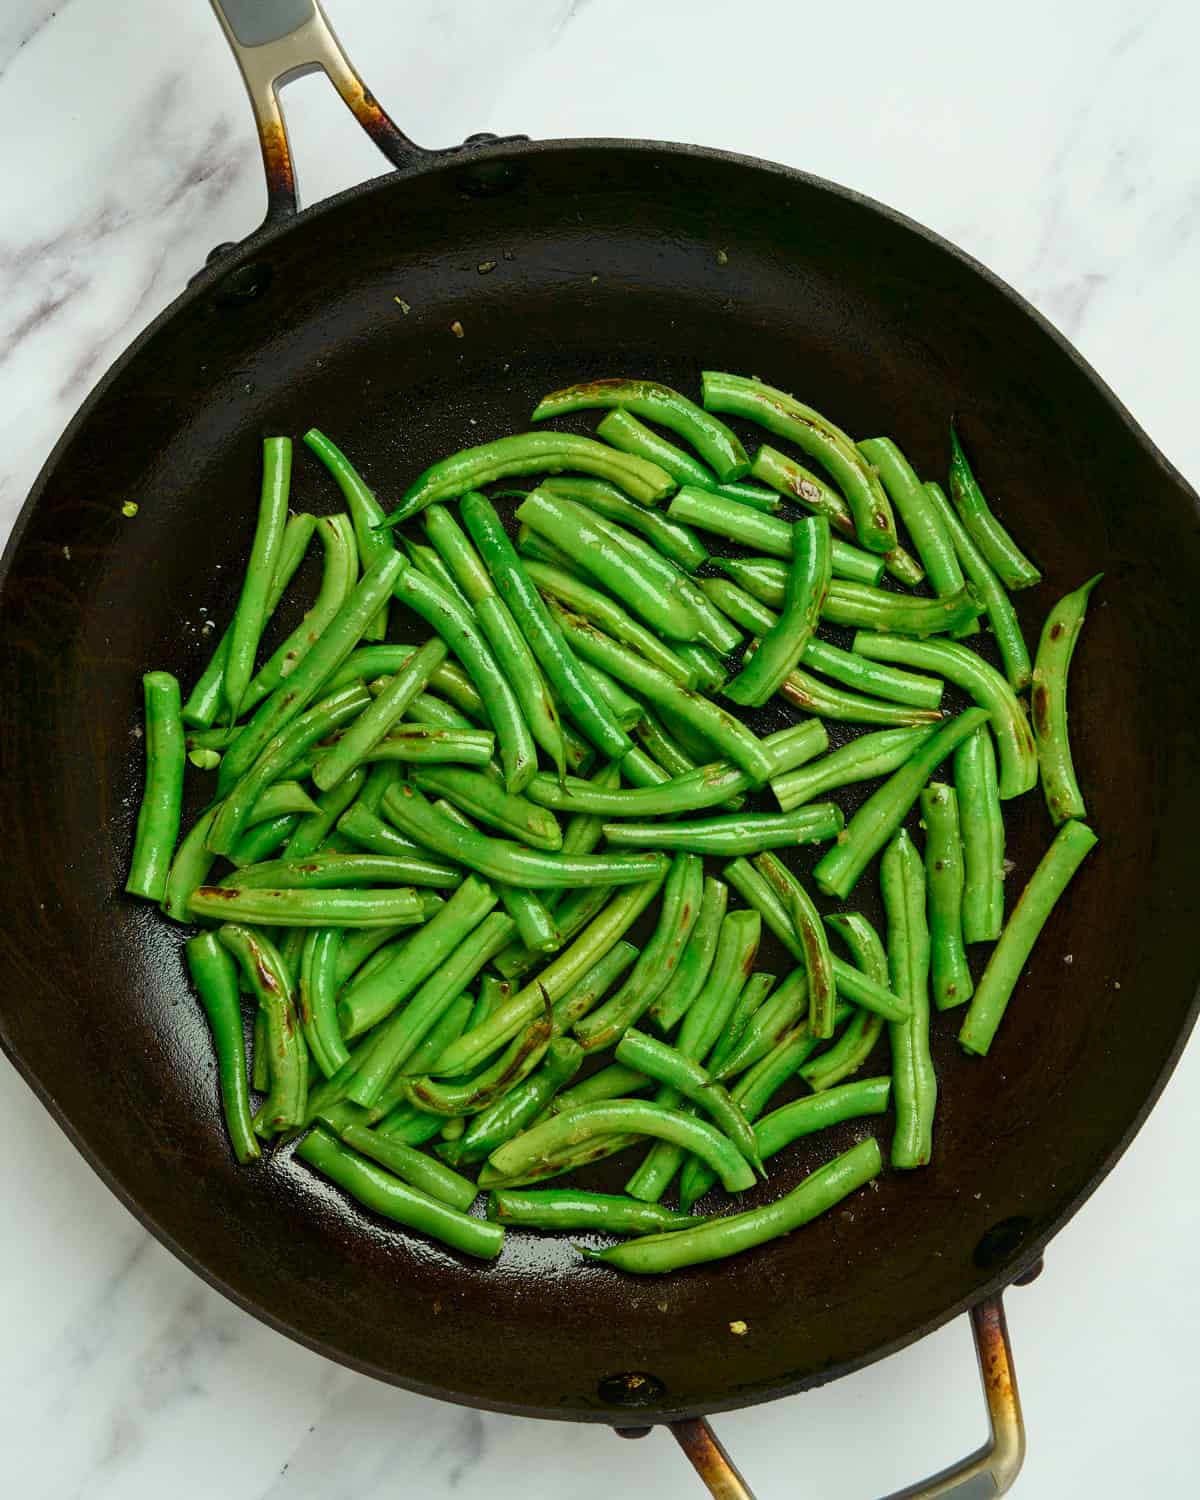 Charred green beans in a skillet.